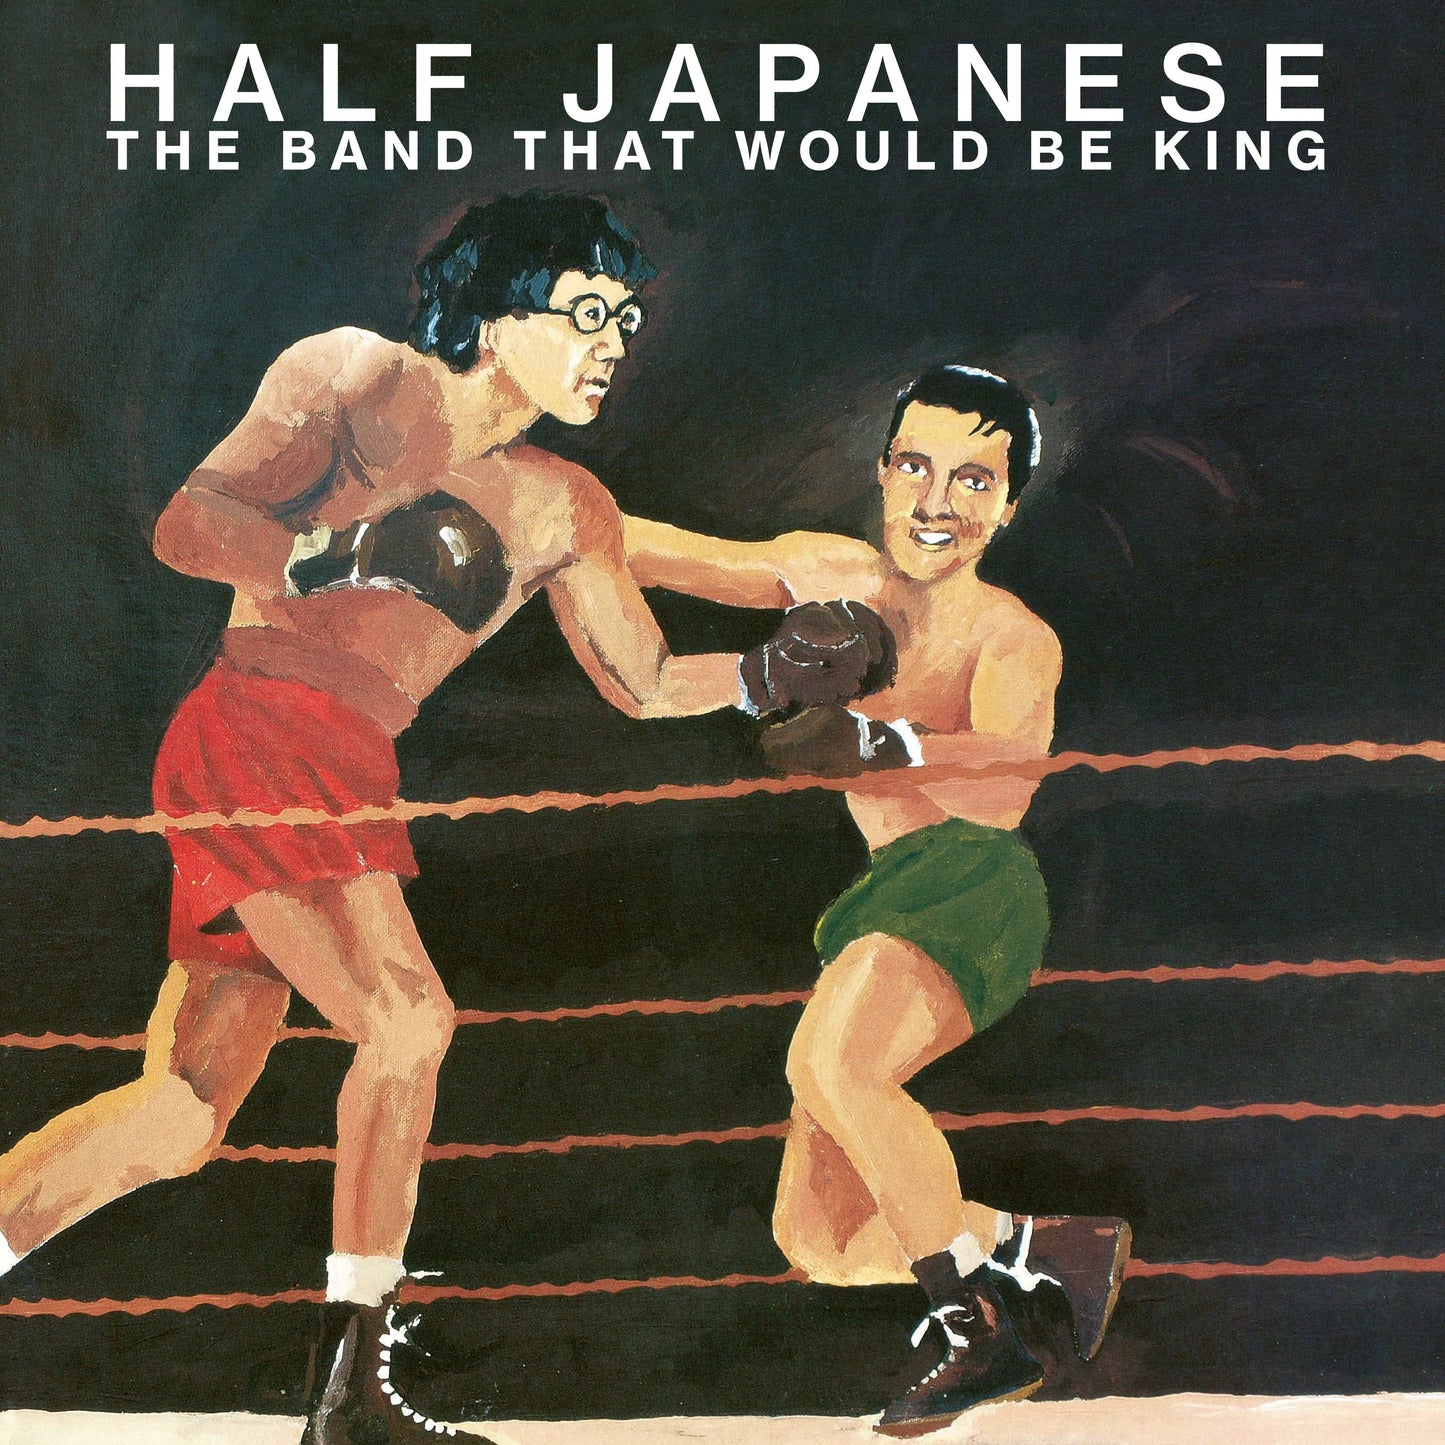 Half Japanese - The Band That Would Be King - The Vault Collective ltd